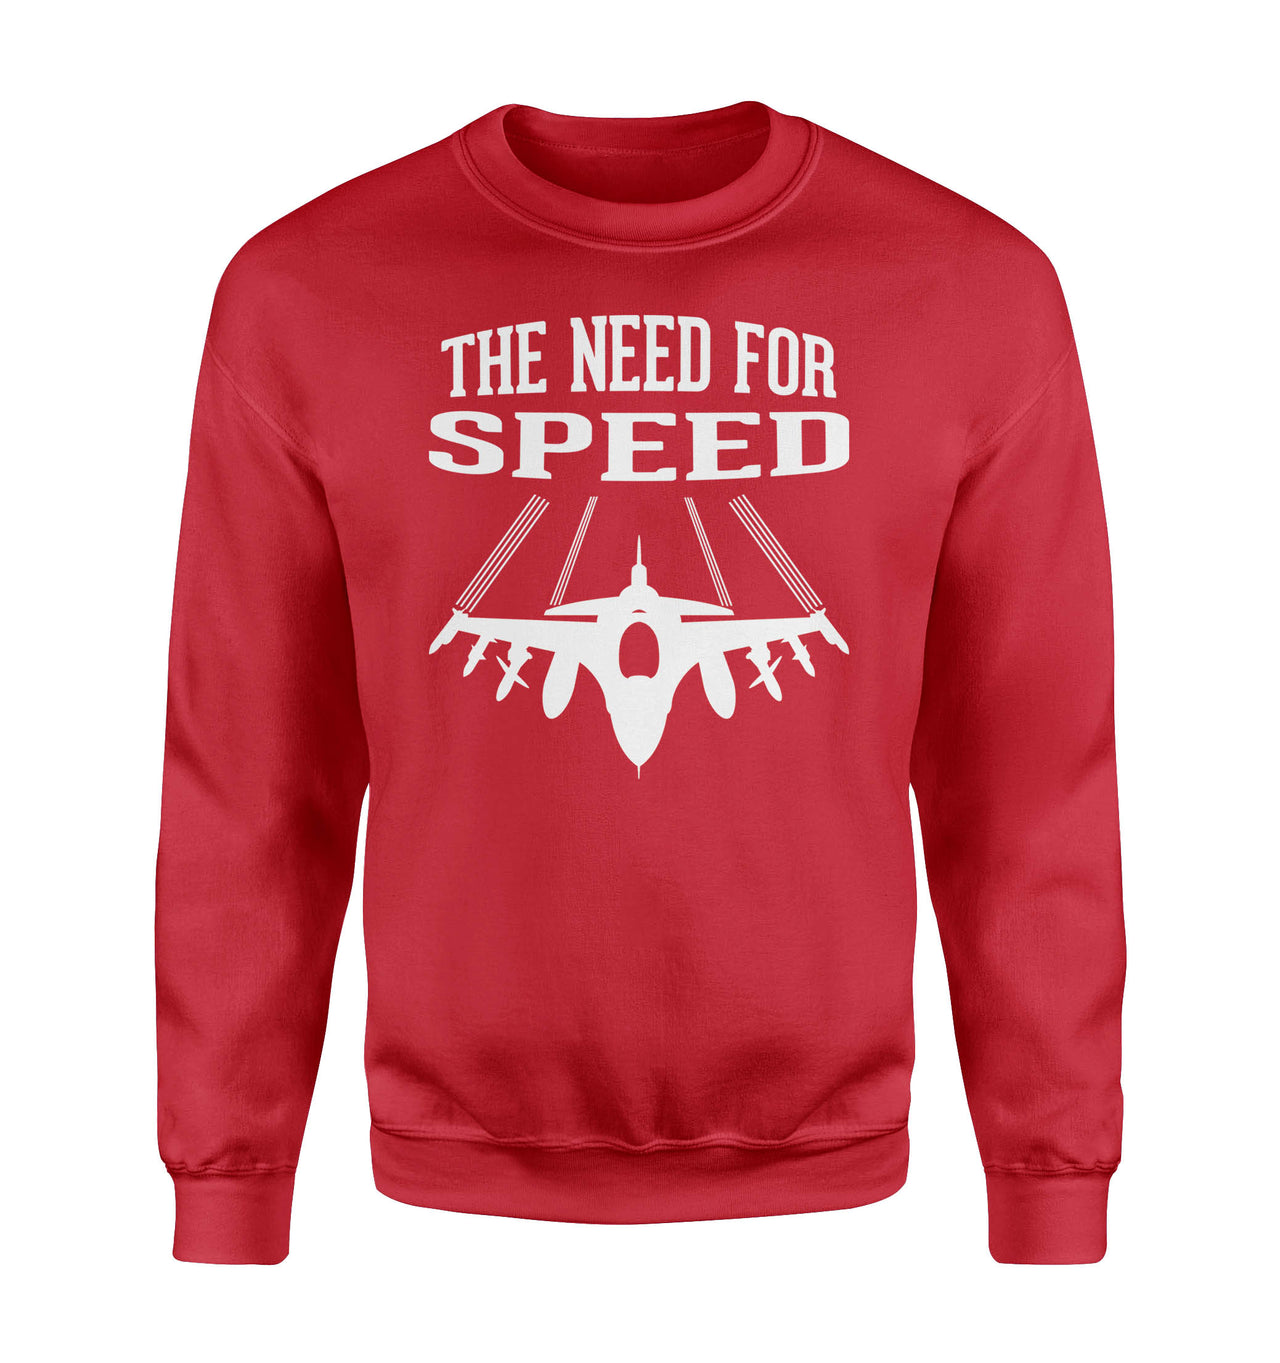 The Need For Speed Designed Sweatshirts